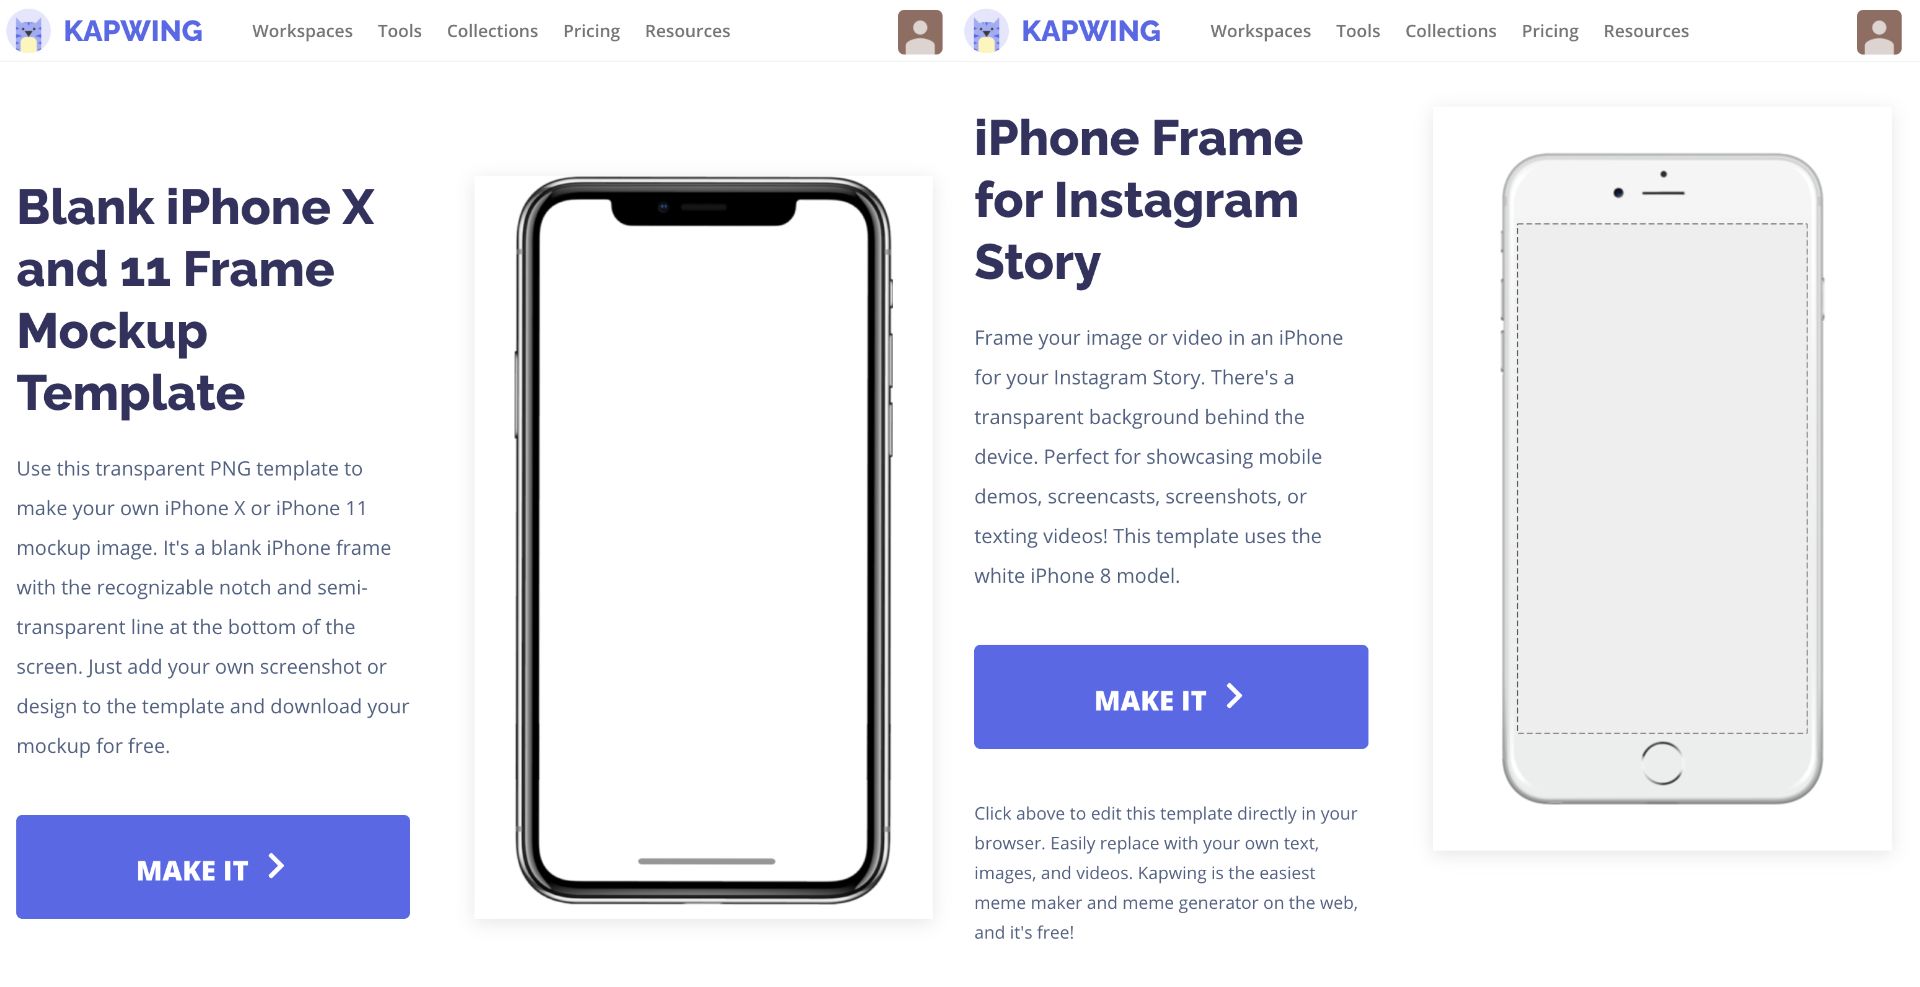 How To Make An Iphone Mockup Online